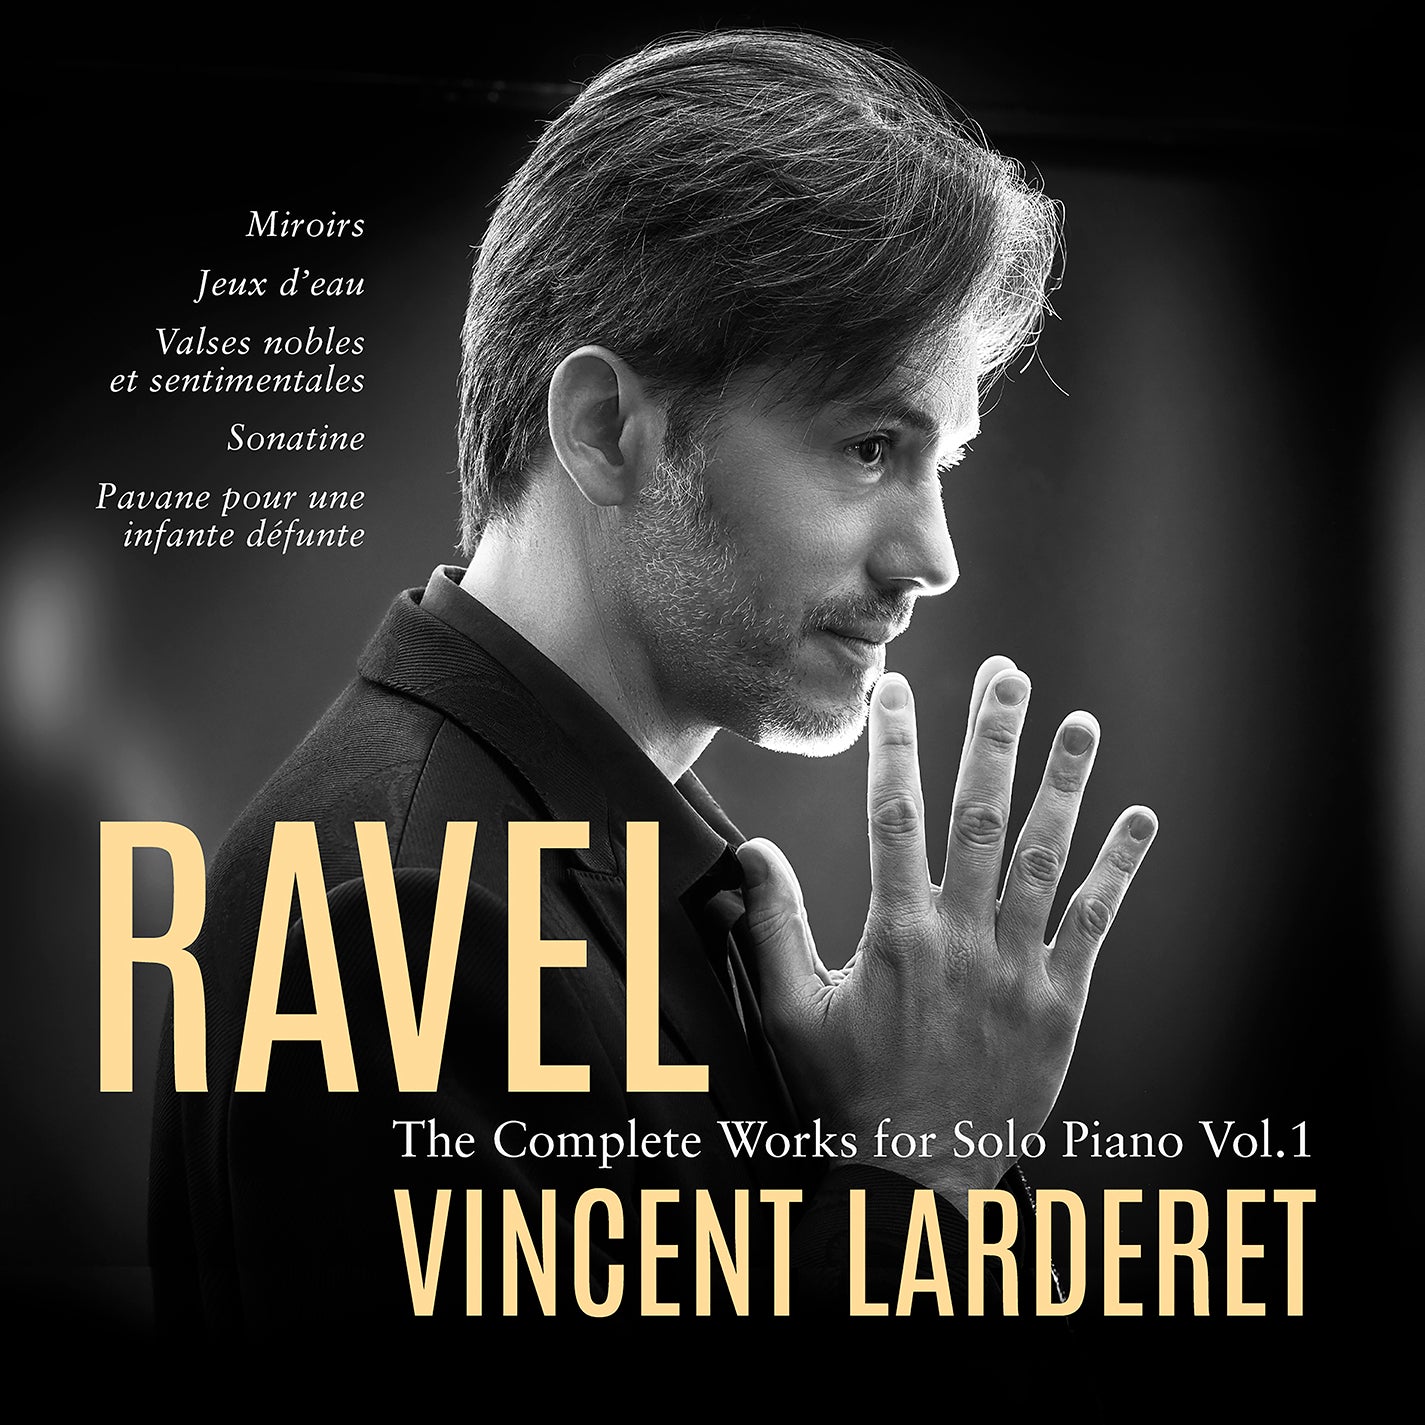 Ravel: Complete Works for Solo Piano, Vol. 1 / Larderet